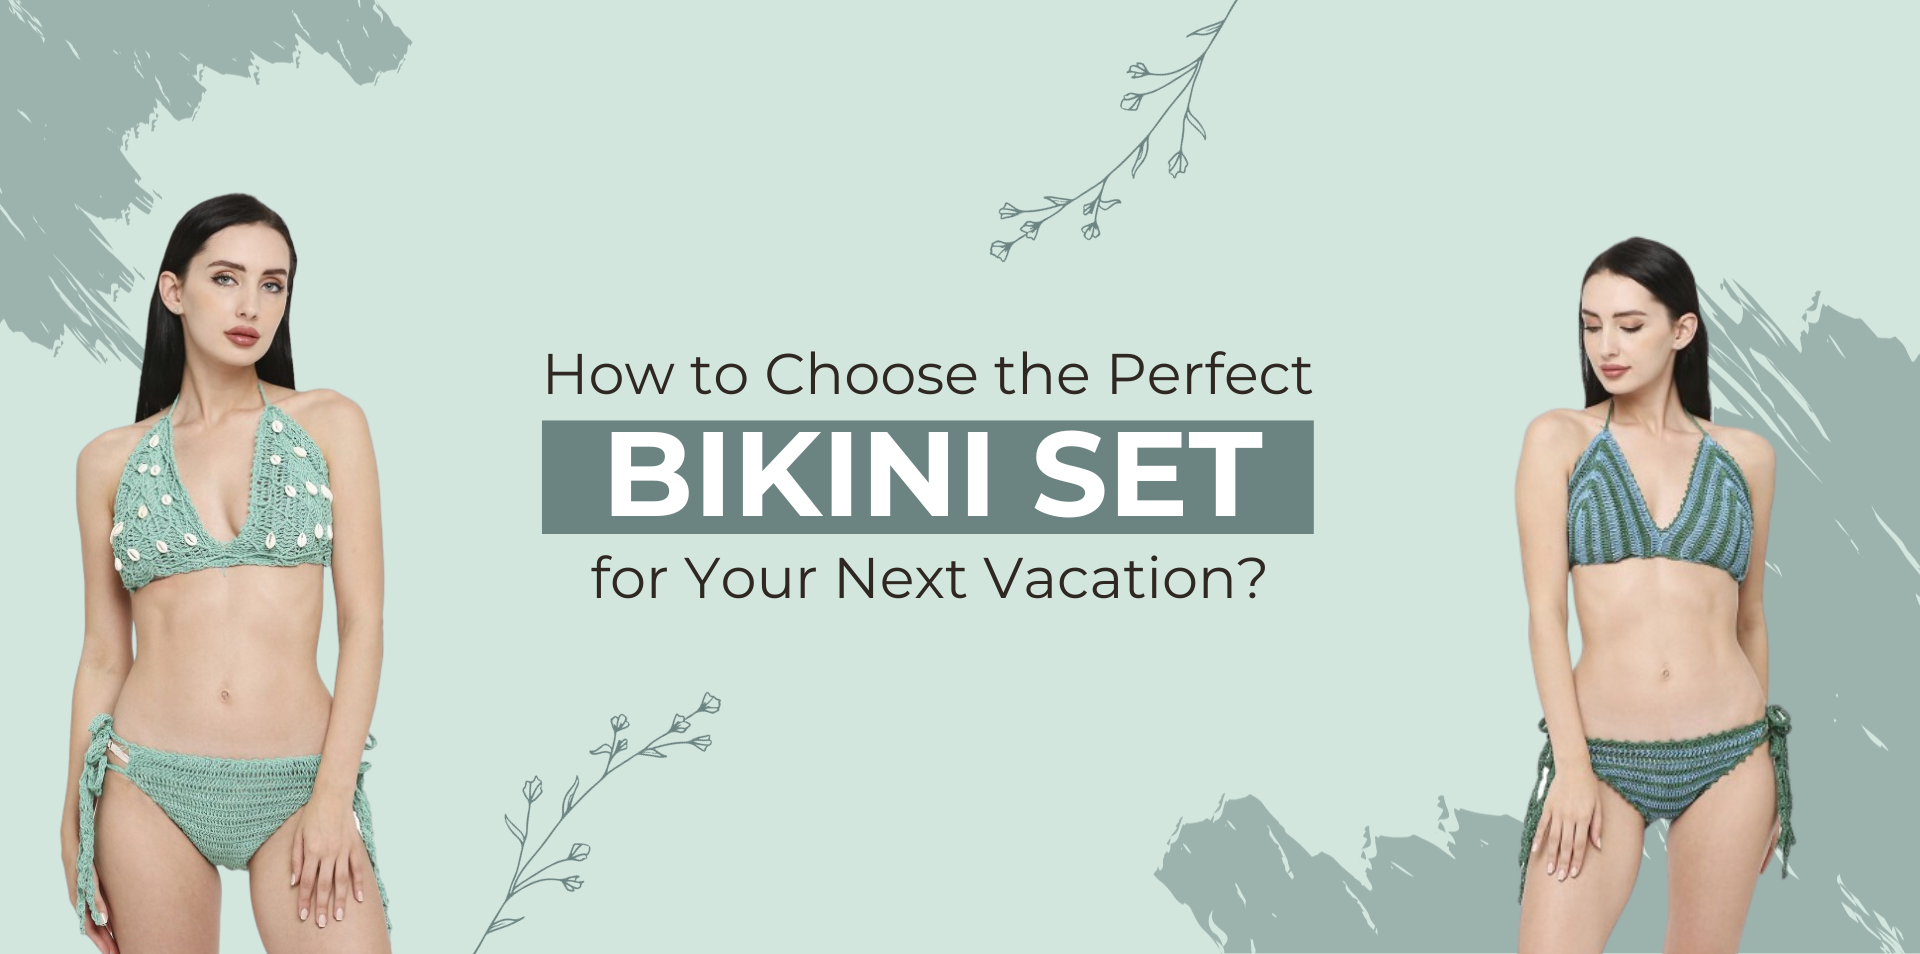 How to Choose the Perfect Bikini Set for Your Next Vacation?